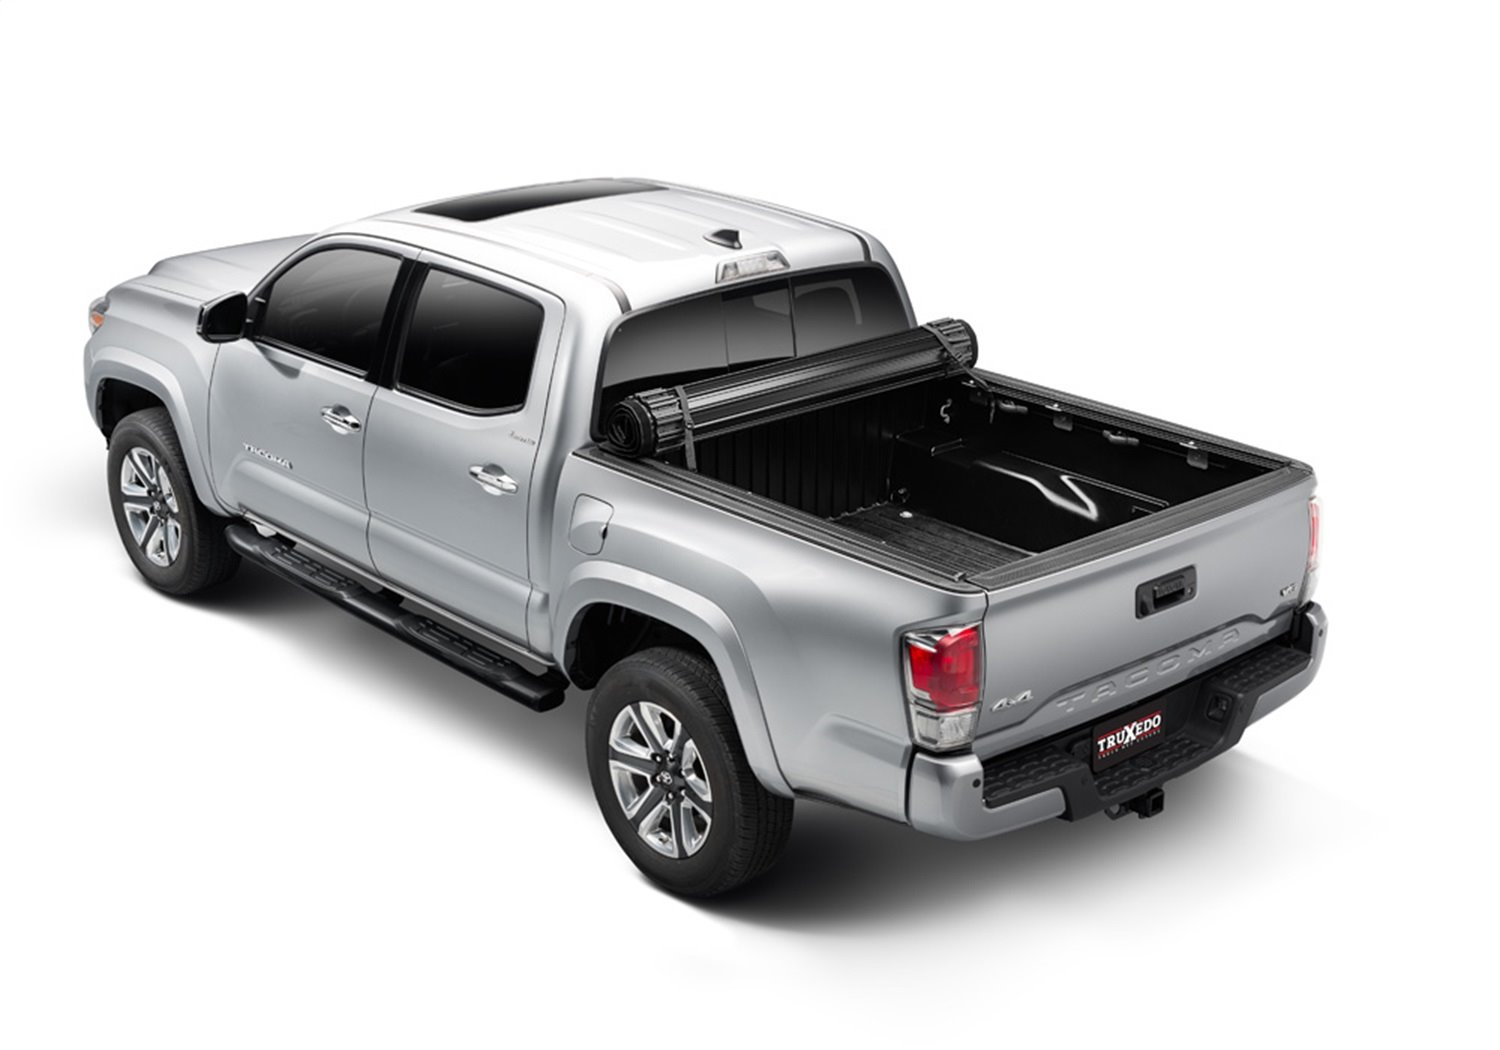 Sentry CT Roll-Up Tonneau Cover Fits Select Toyota Tundra, With Deck Rail System, Bed Length: 5 ft. 6 in.